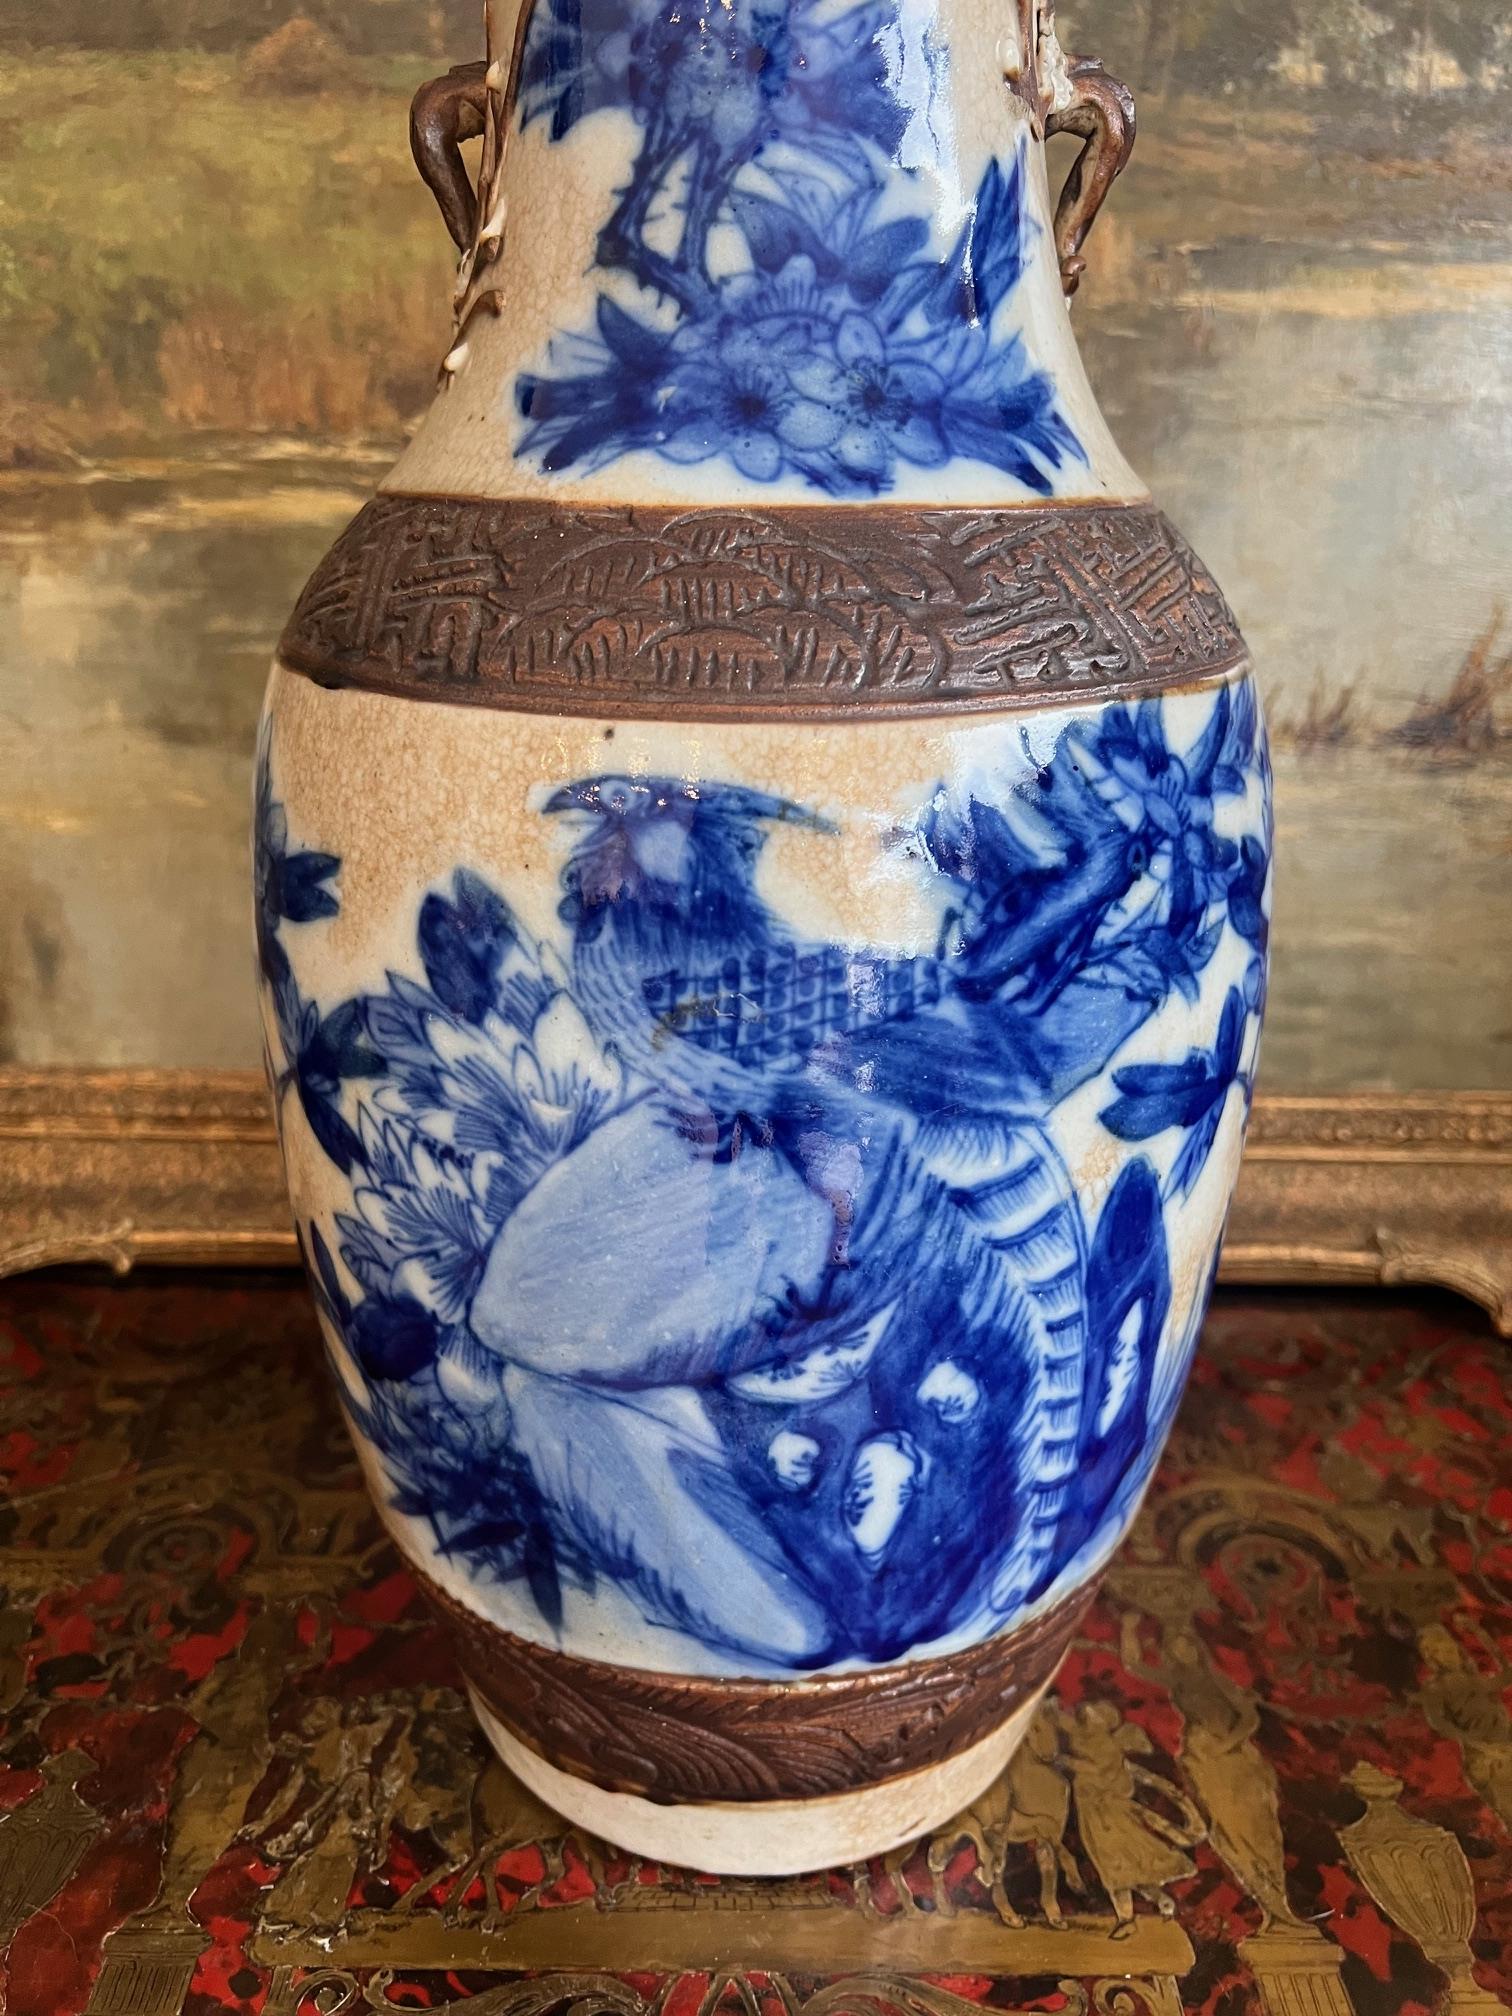 A LATE 19TH CENTURY CHINESE BLUE AND WHITE CRACKLE GLAZED PORCELAIN VASE - Image 2 of 5